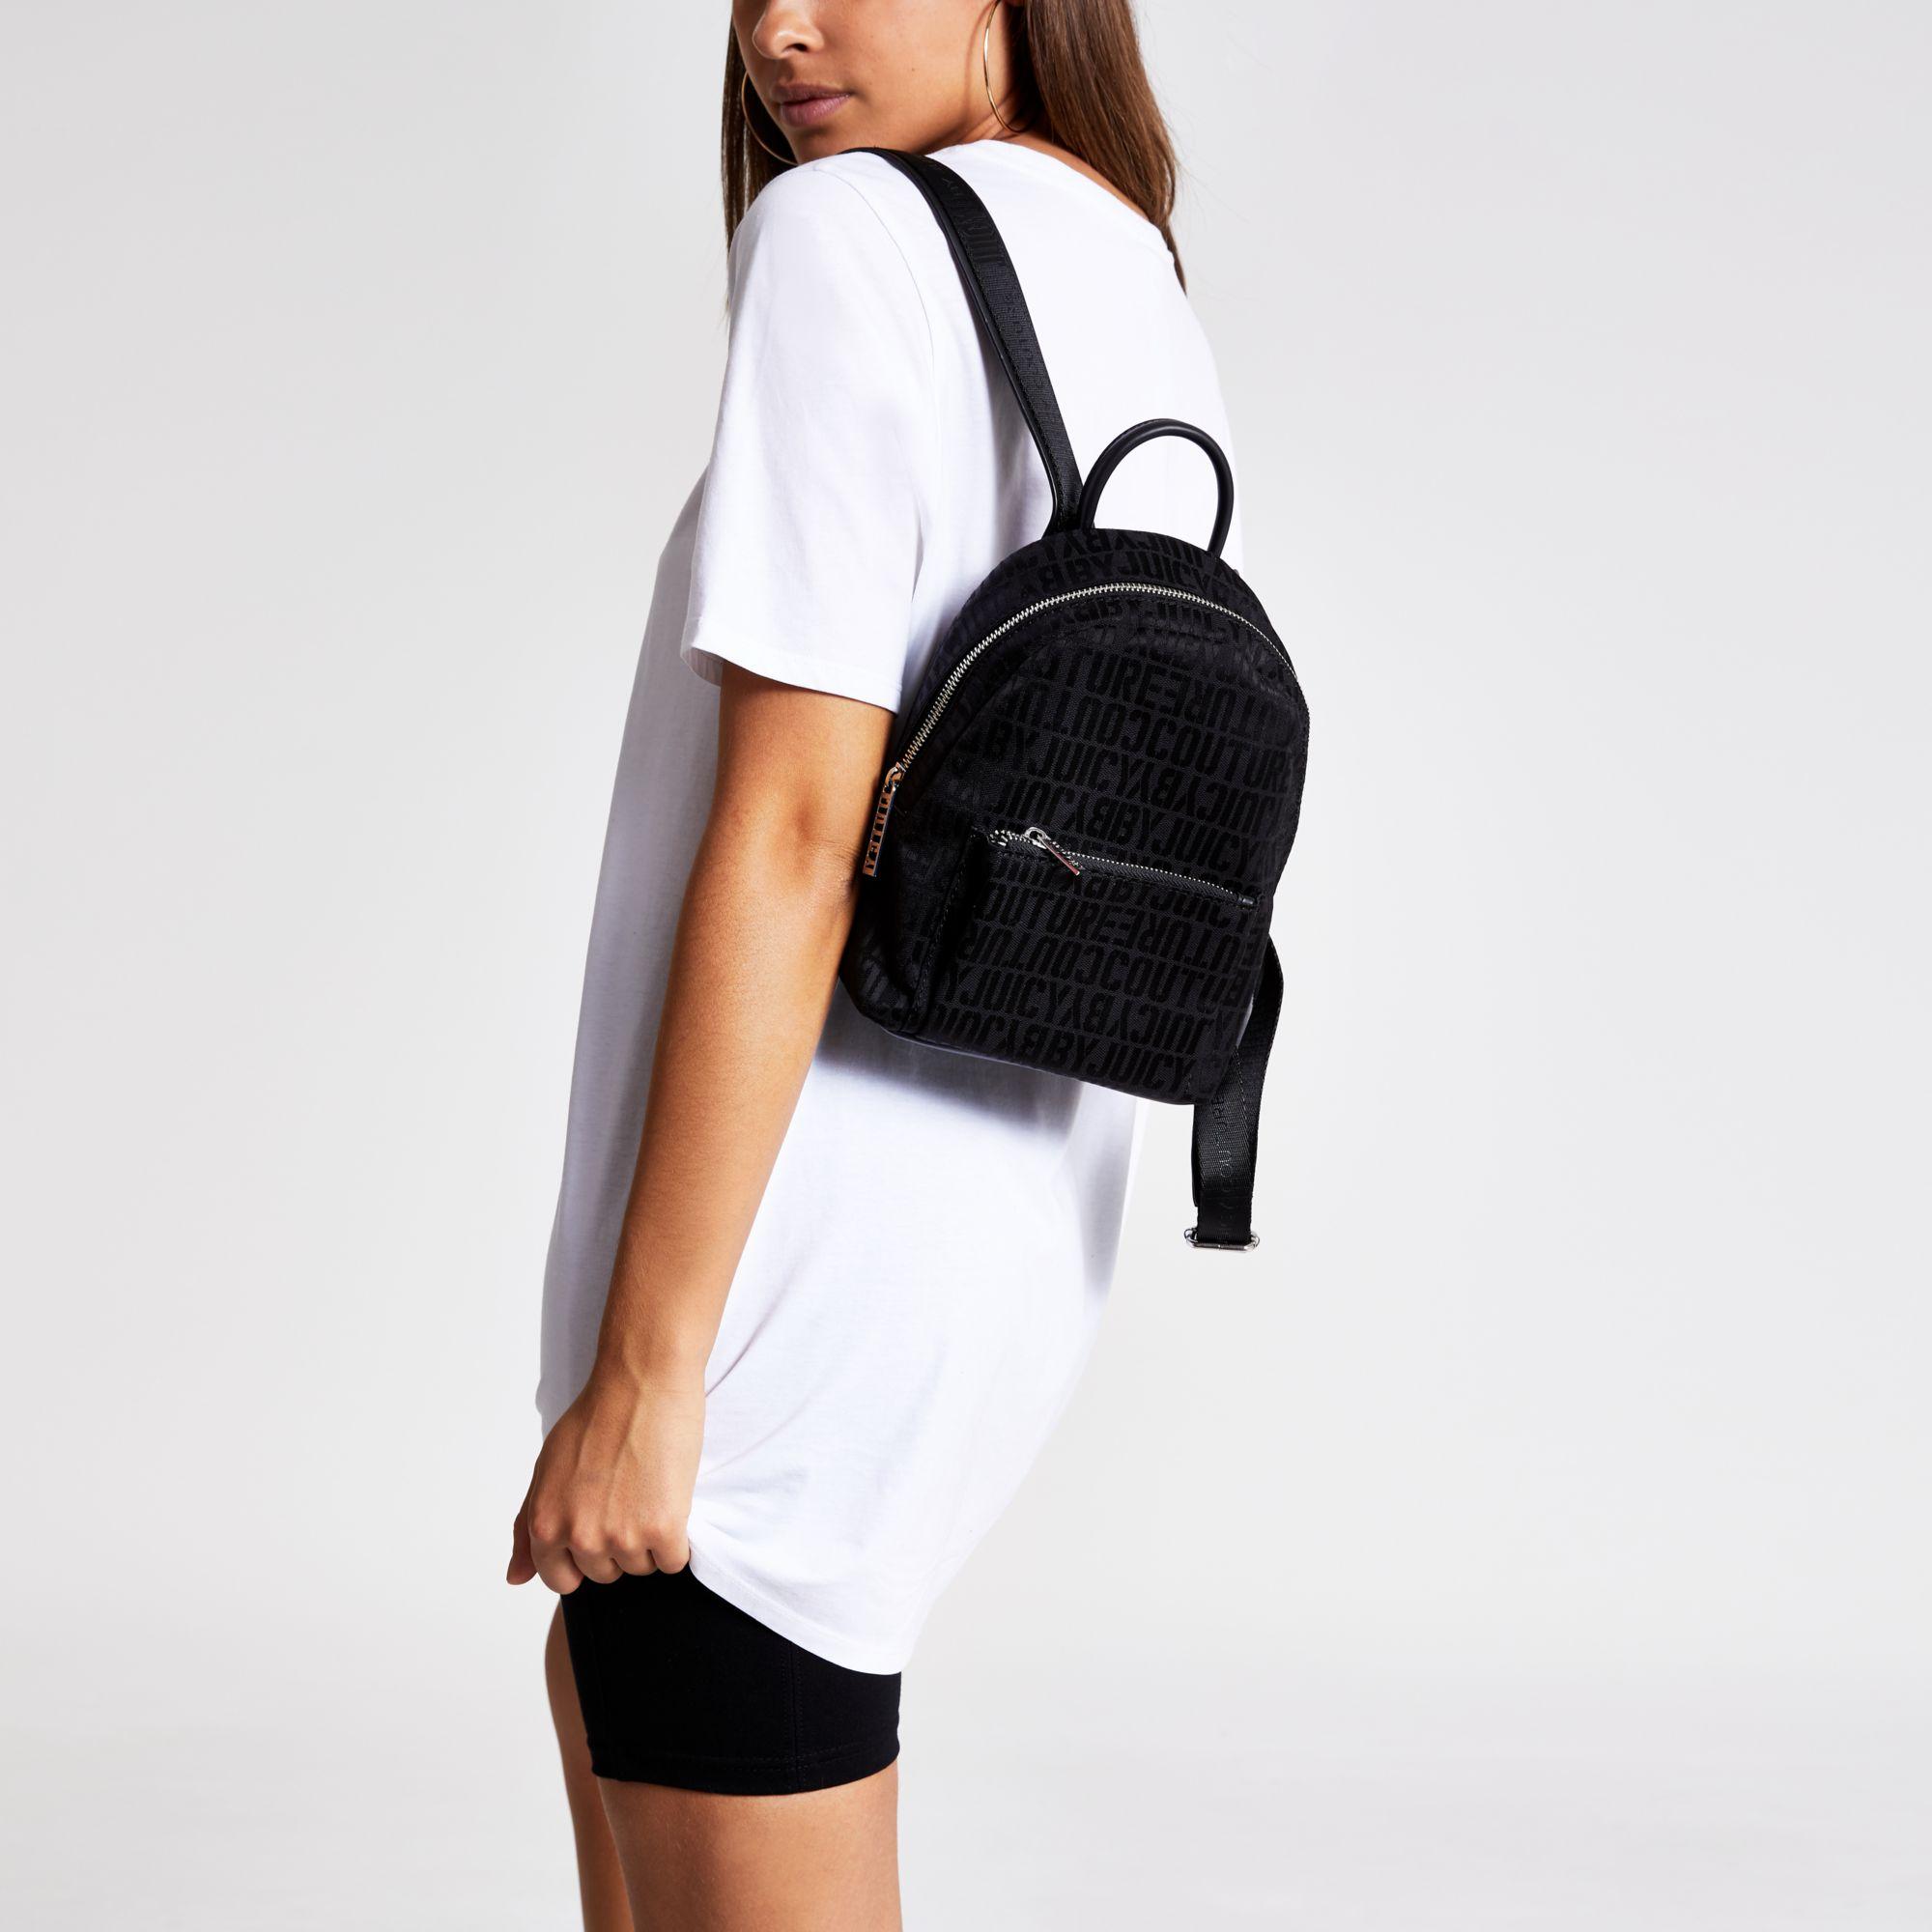 Juicy Couture Purse Backpacks